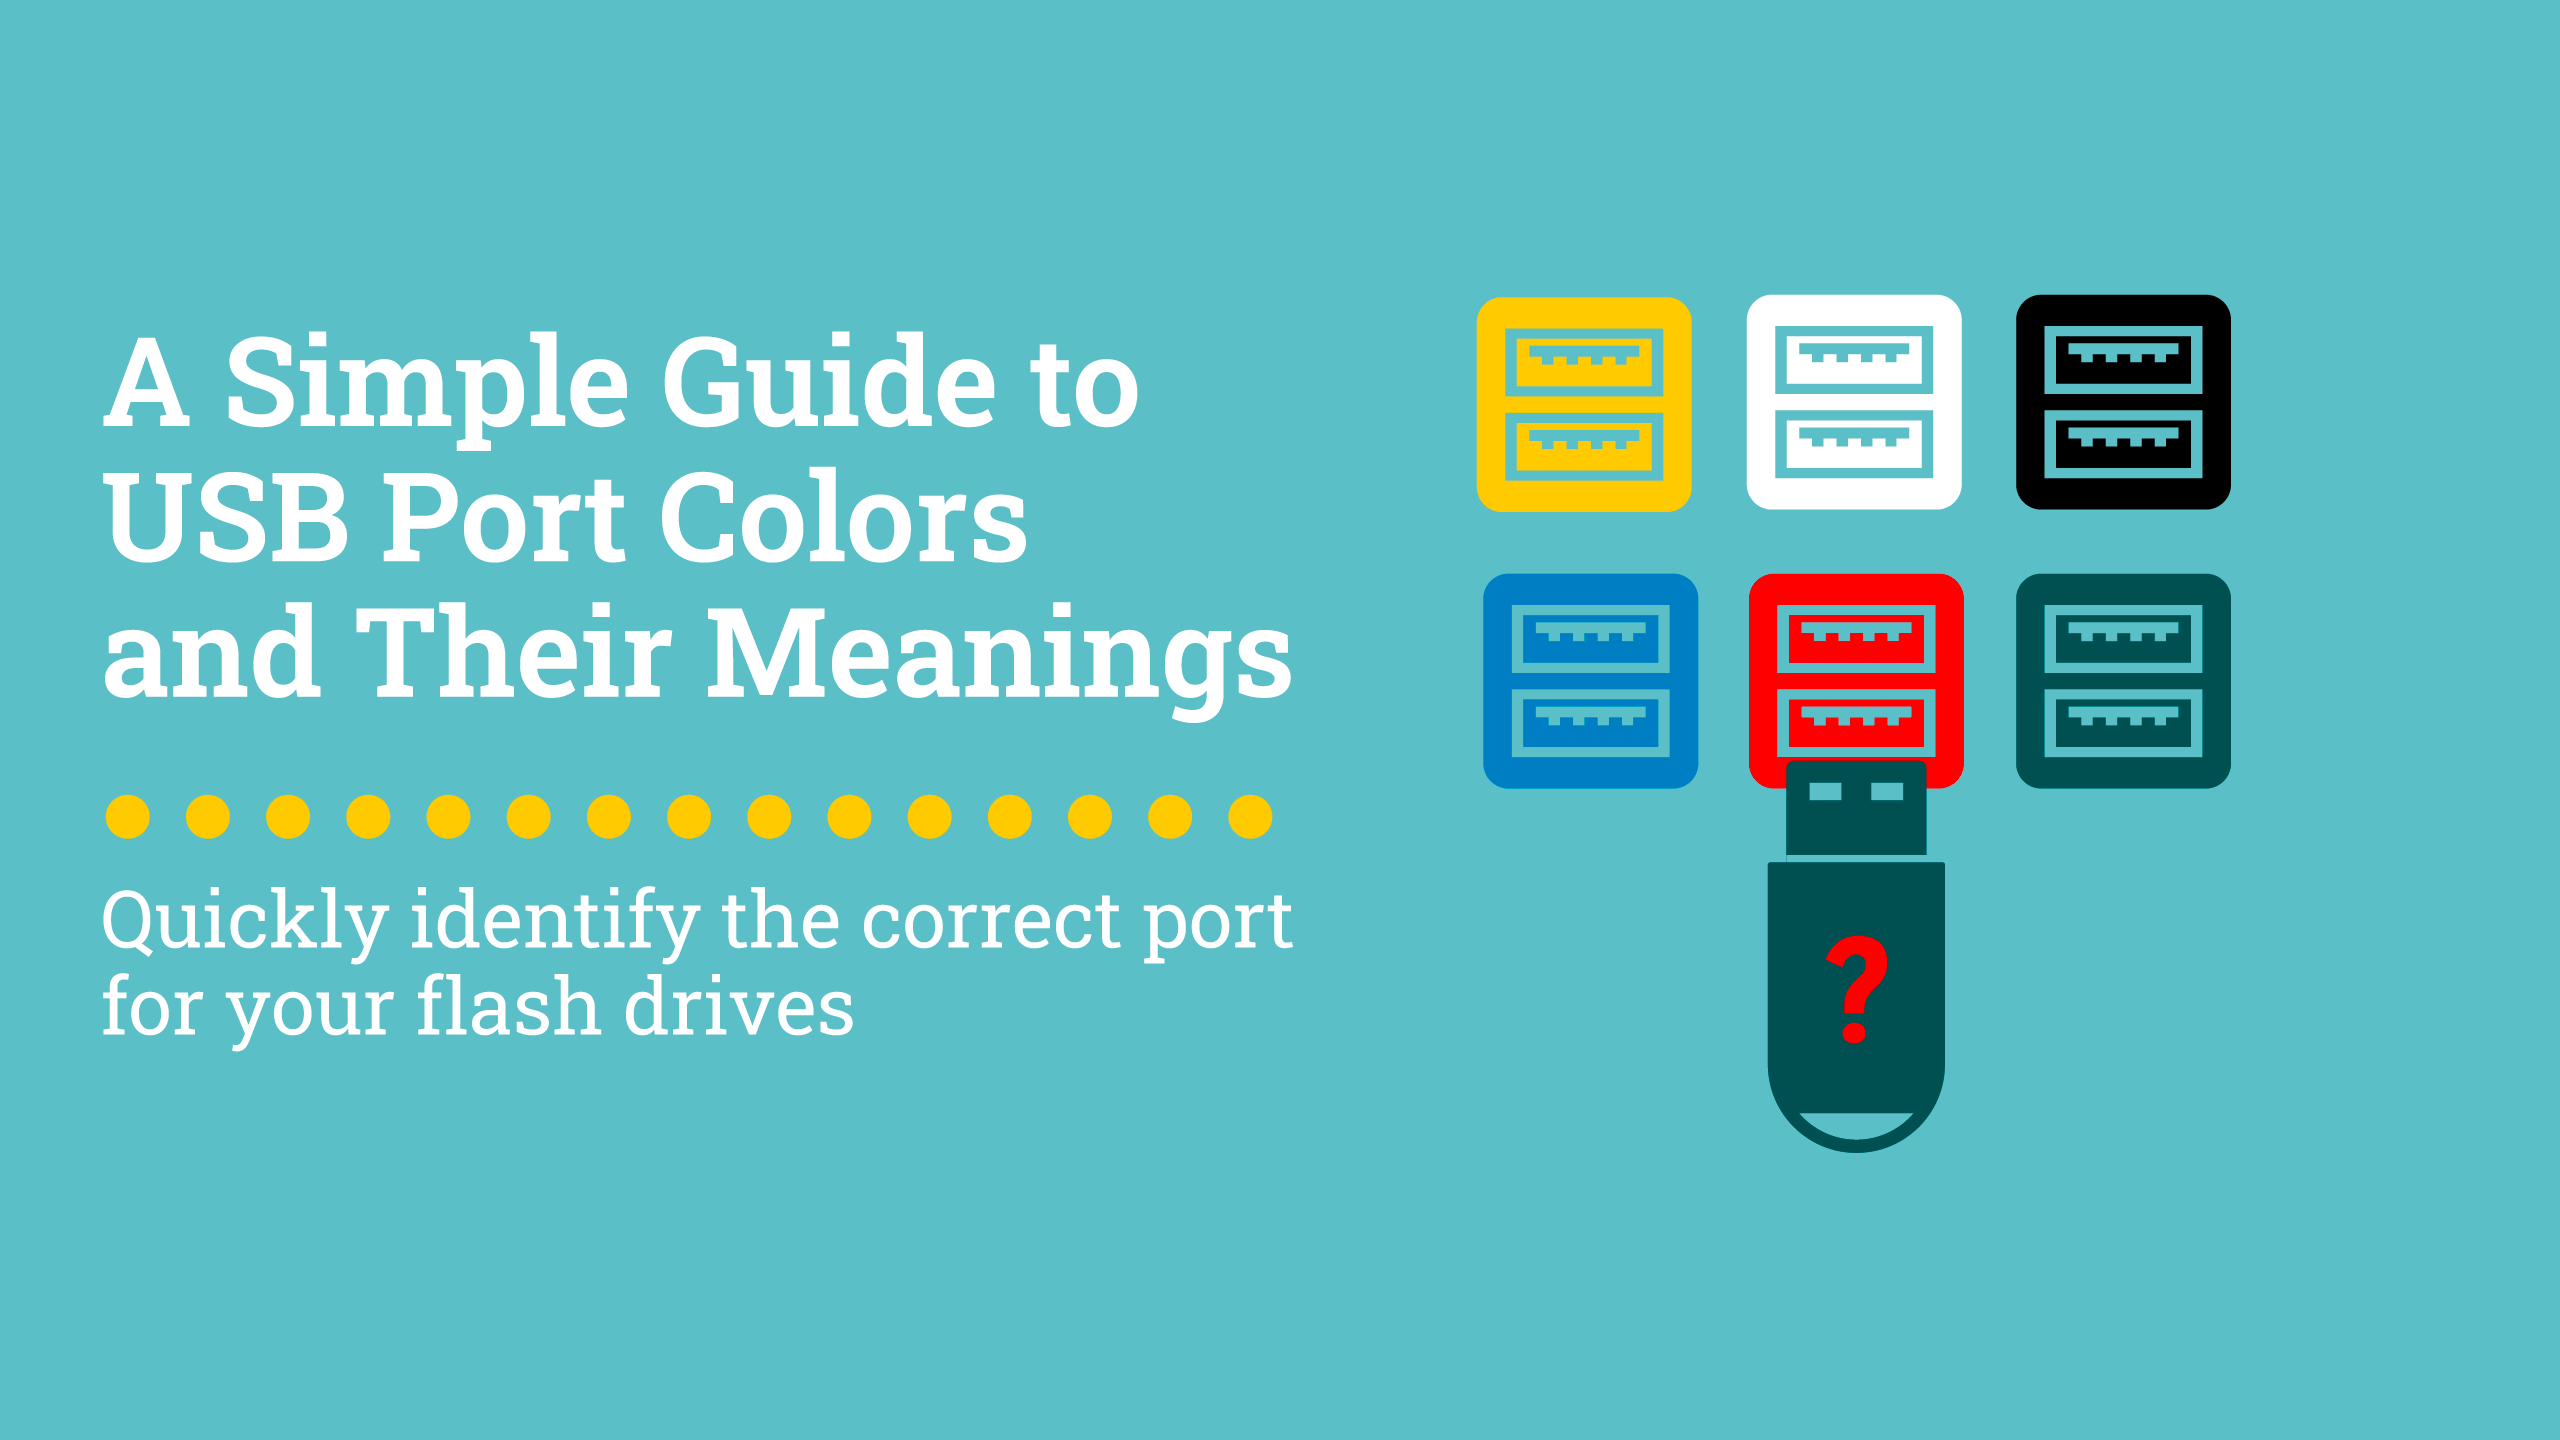 A guide to USB port colors and their meanings.